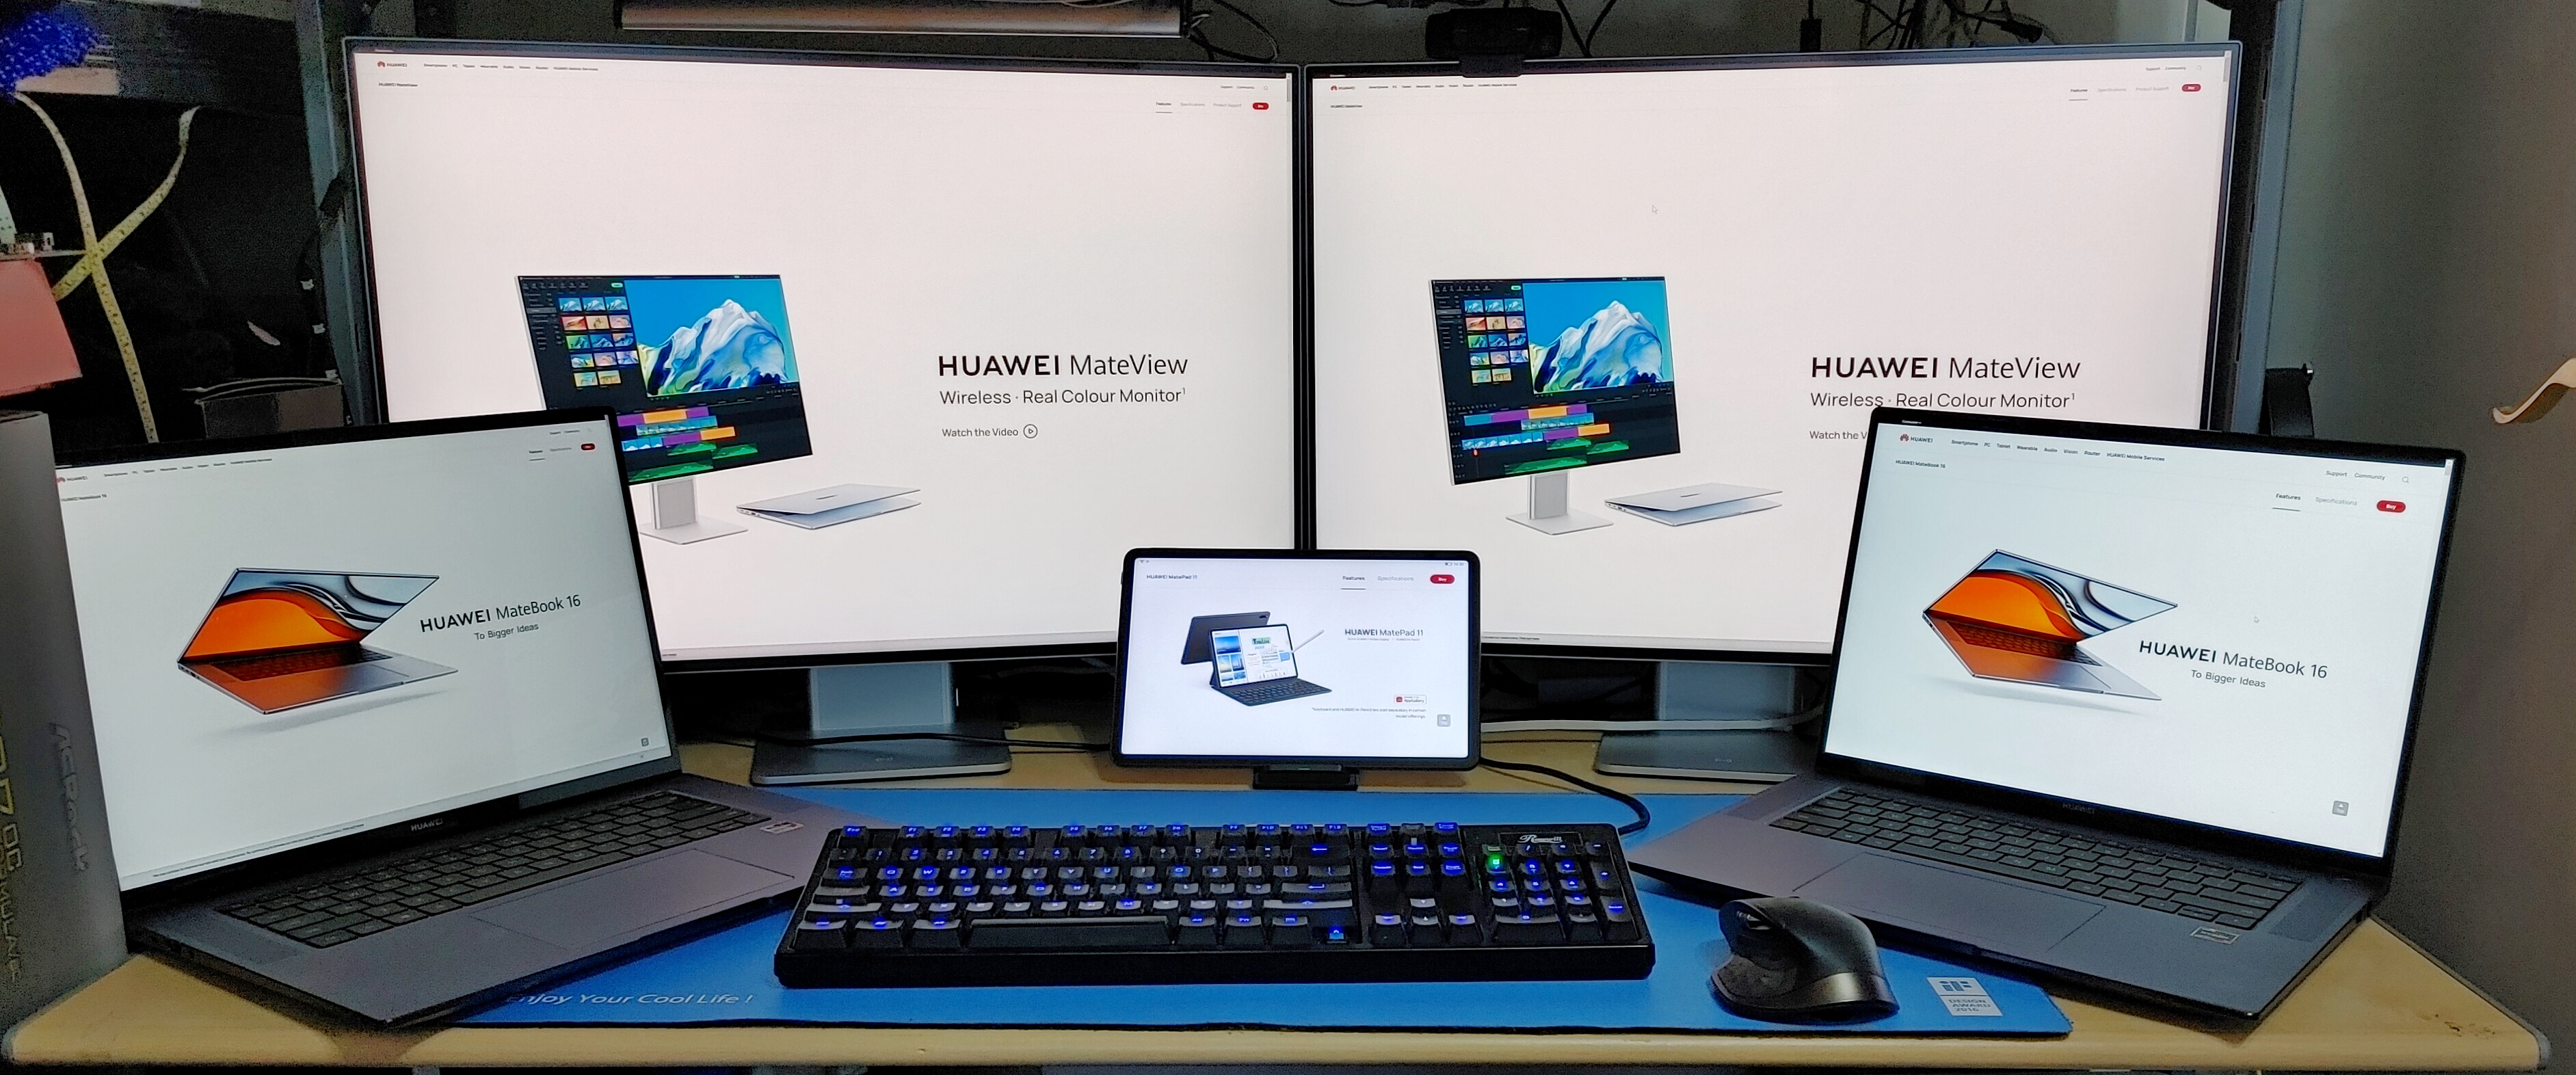 Huawei launches MateView and MateView GT monitors to the global market